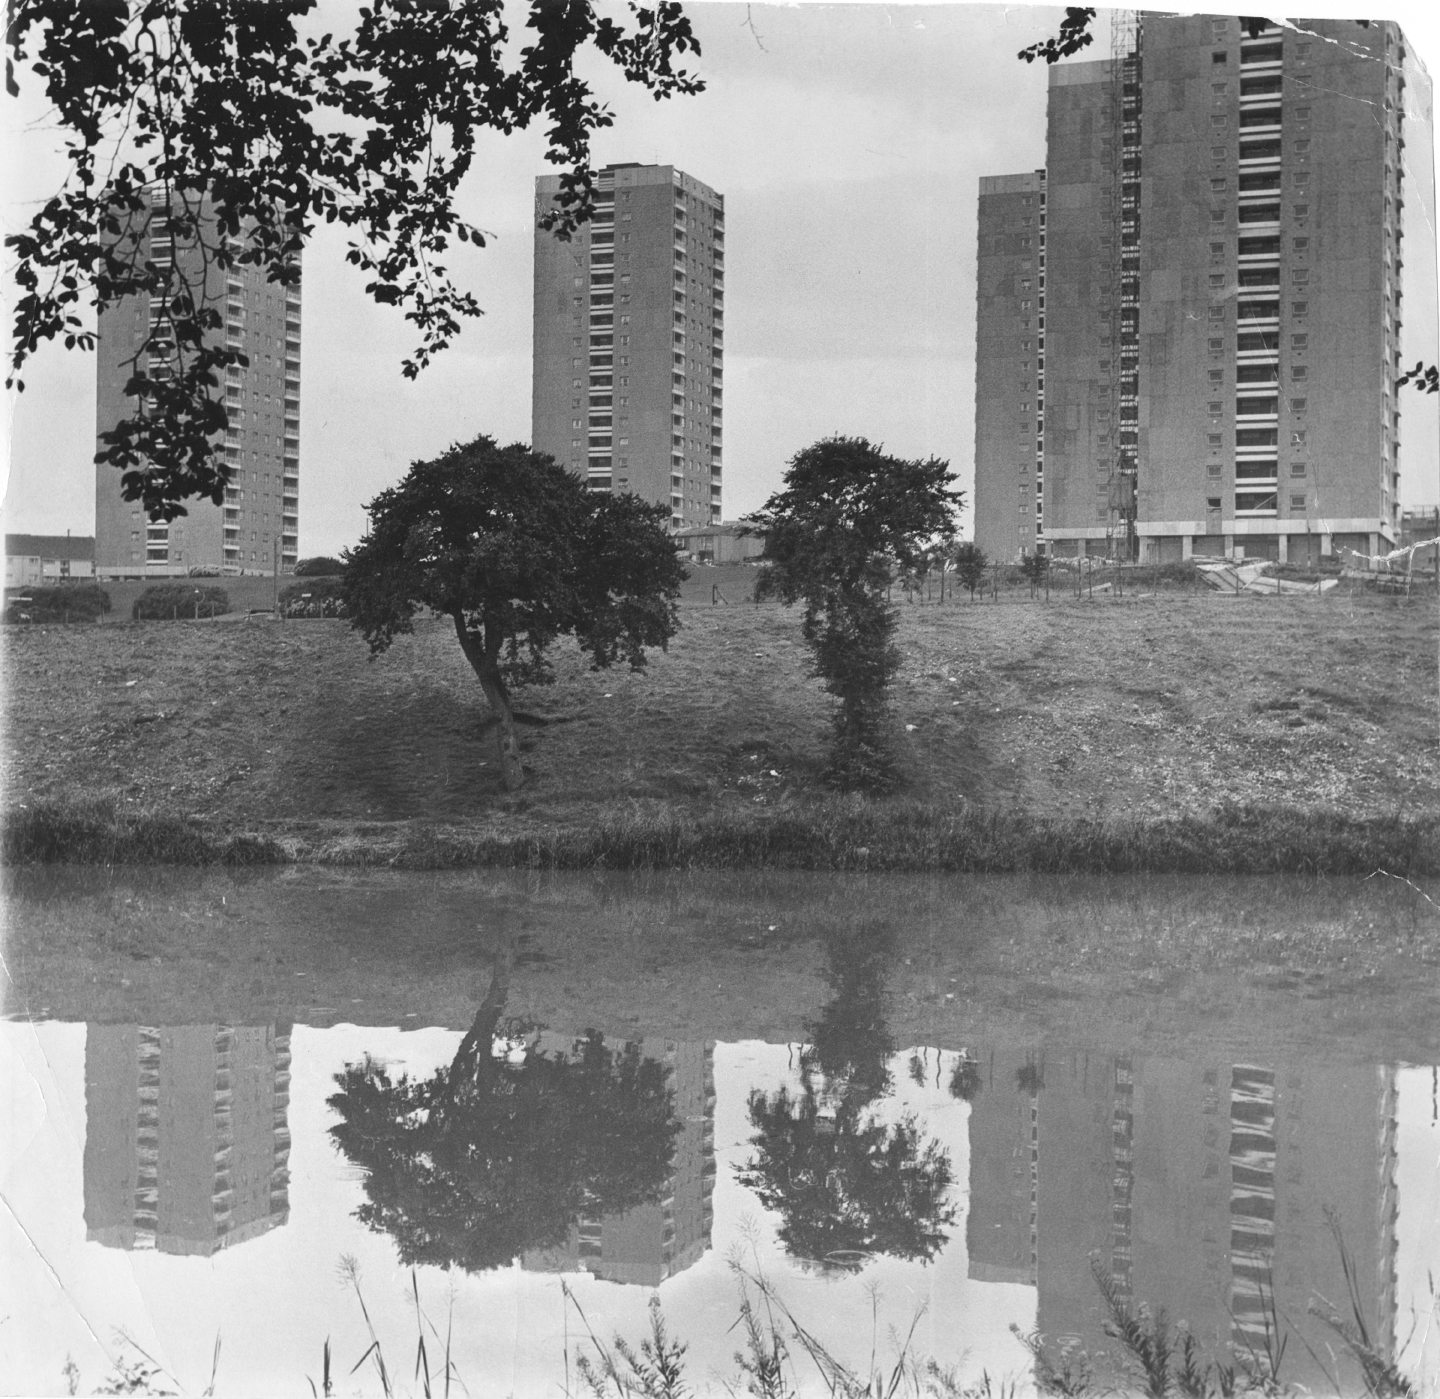 High rise flats in Tillydrone scheme in 1968 from across the river